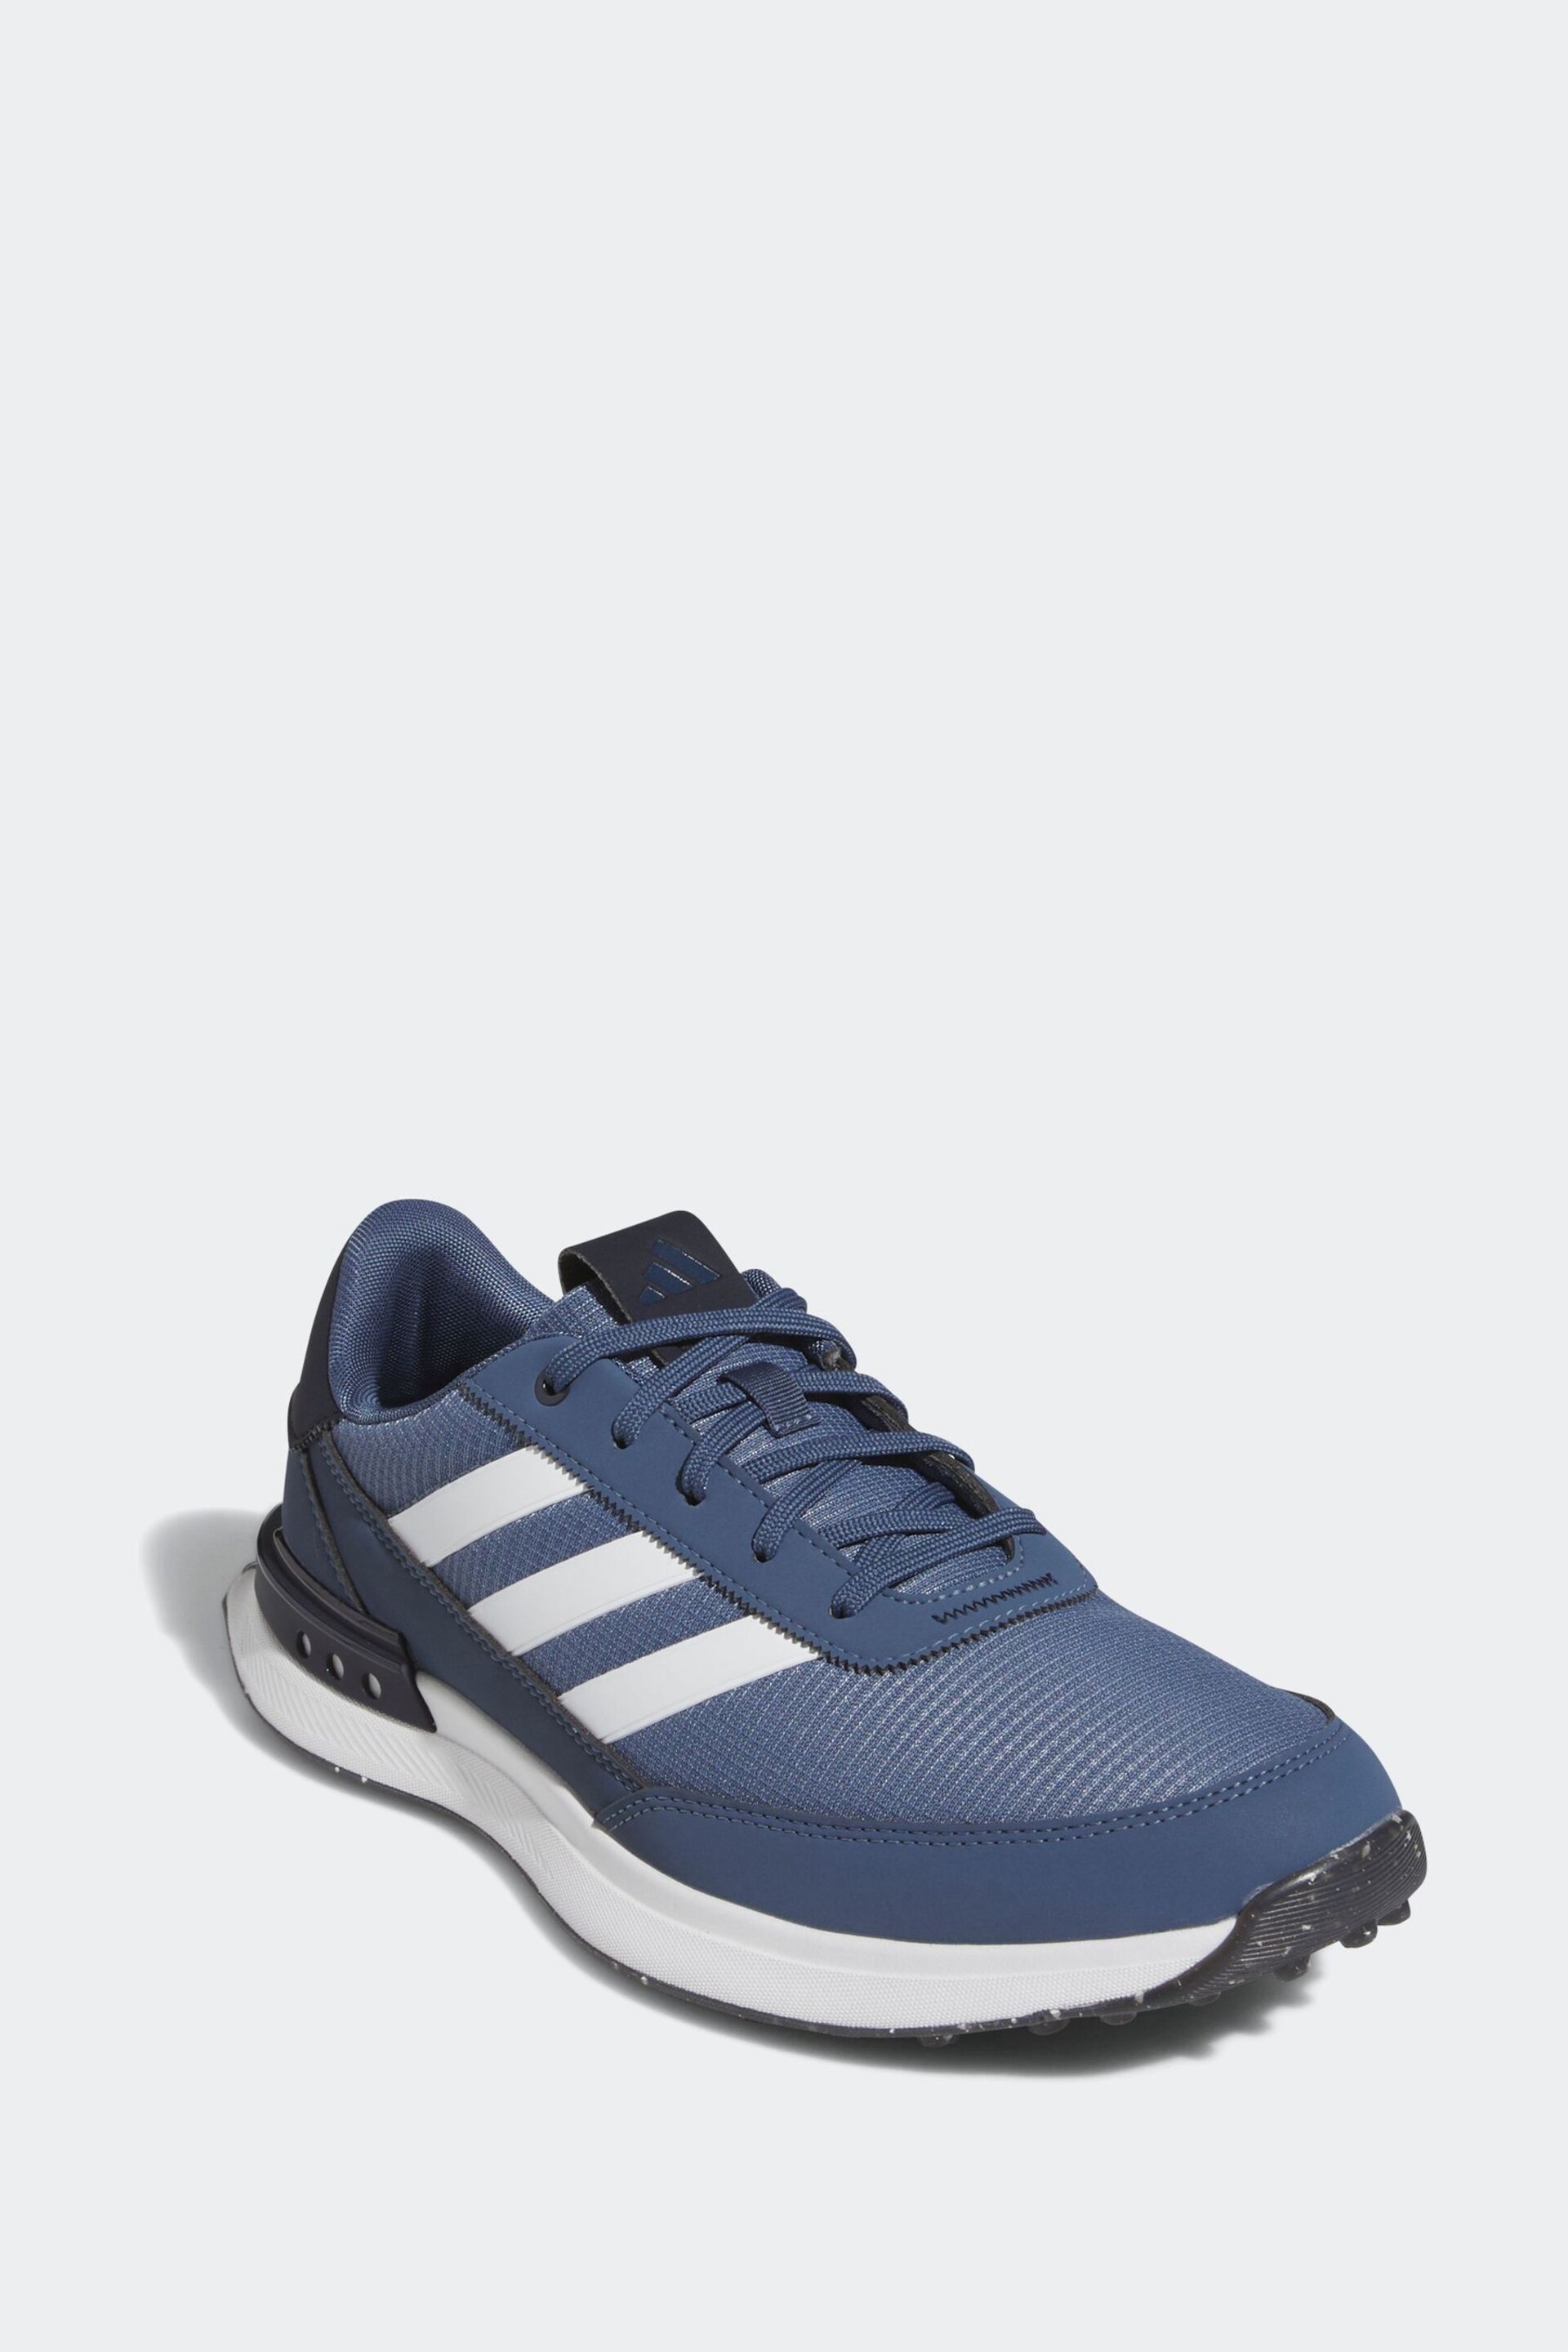 adidas Golf S2G Spikeless 24 Trainers - Image 3 of 9